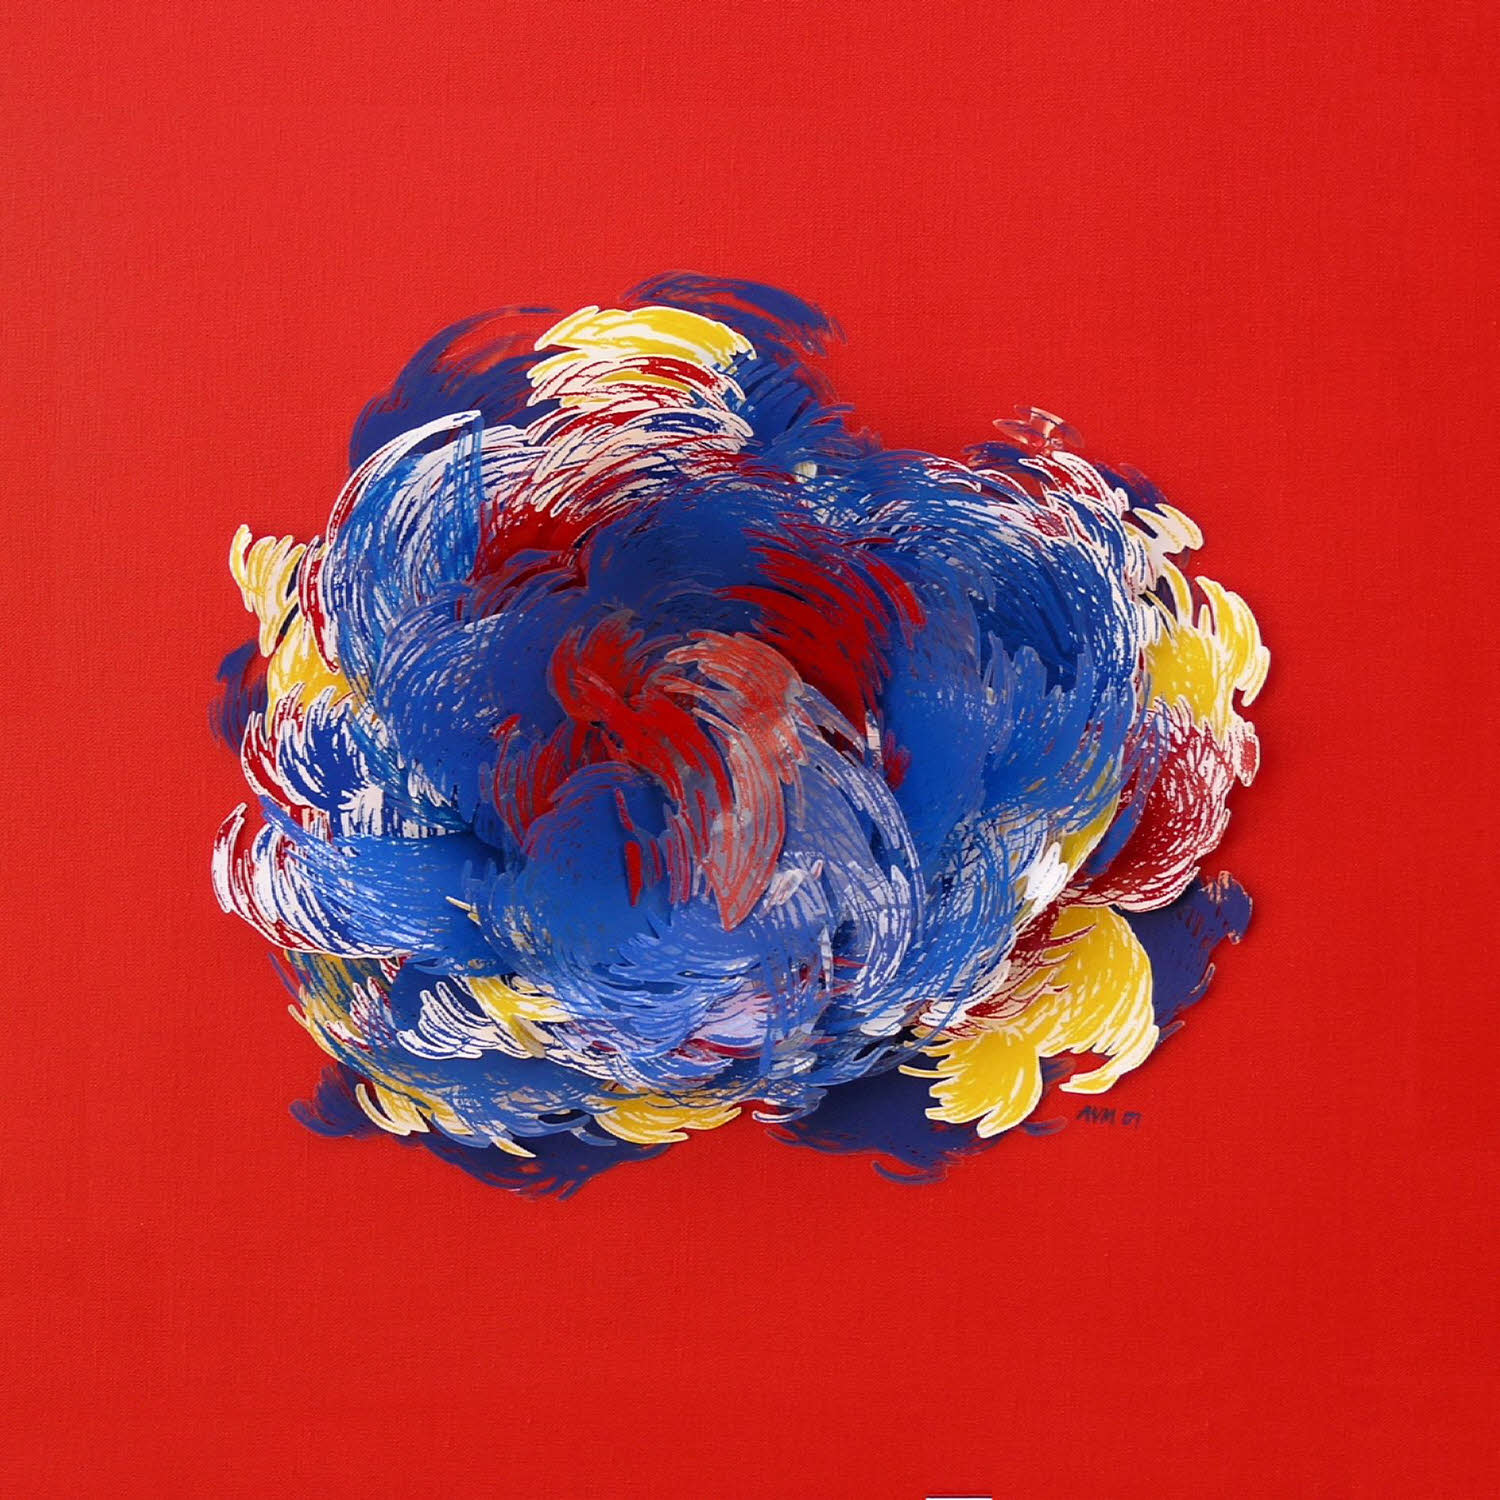 Blue-Mix on Red, 2007, silkscreen collage, 20x20 inches